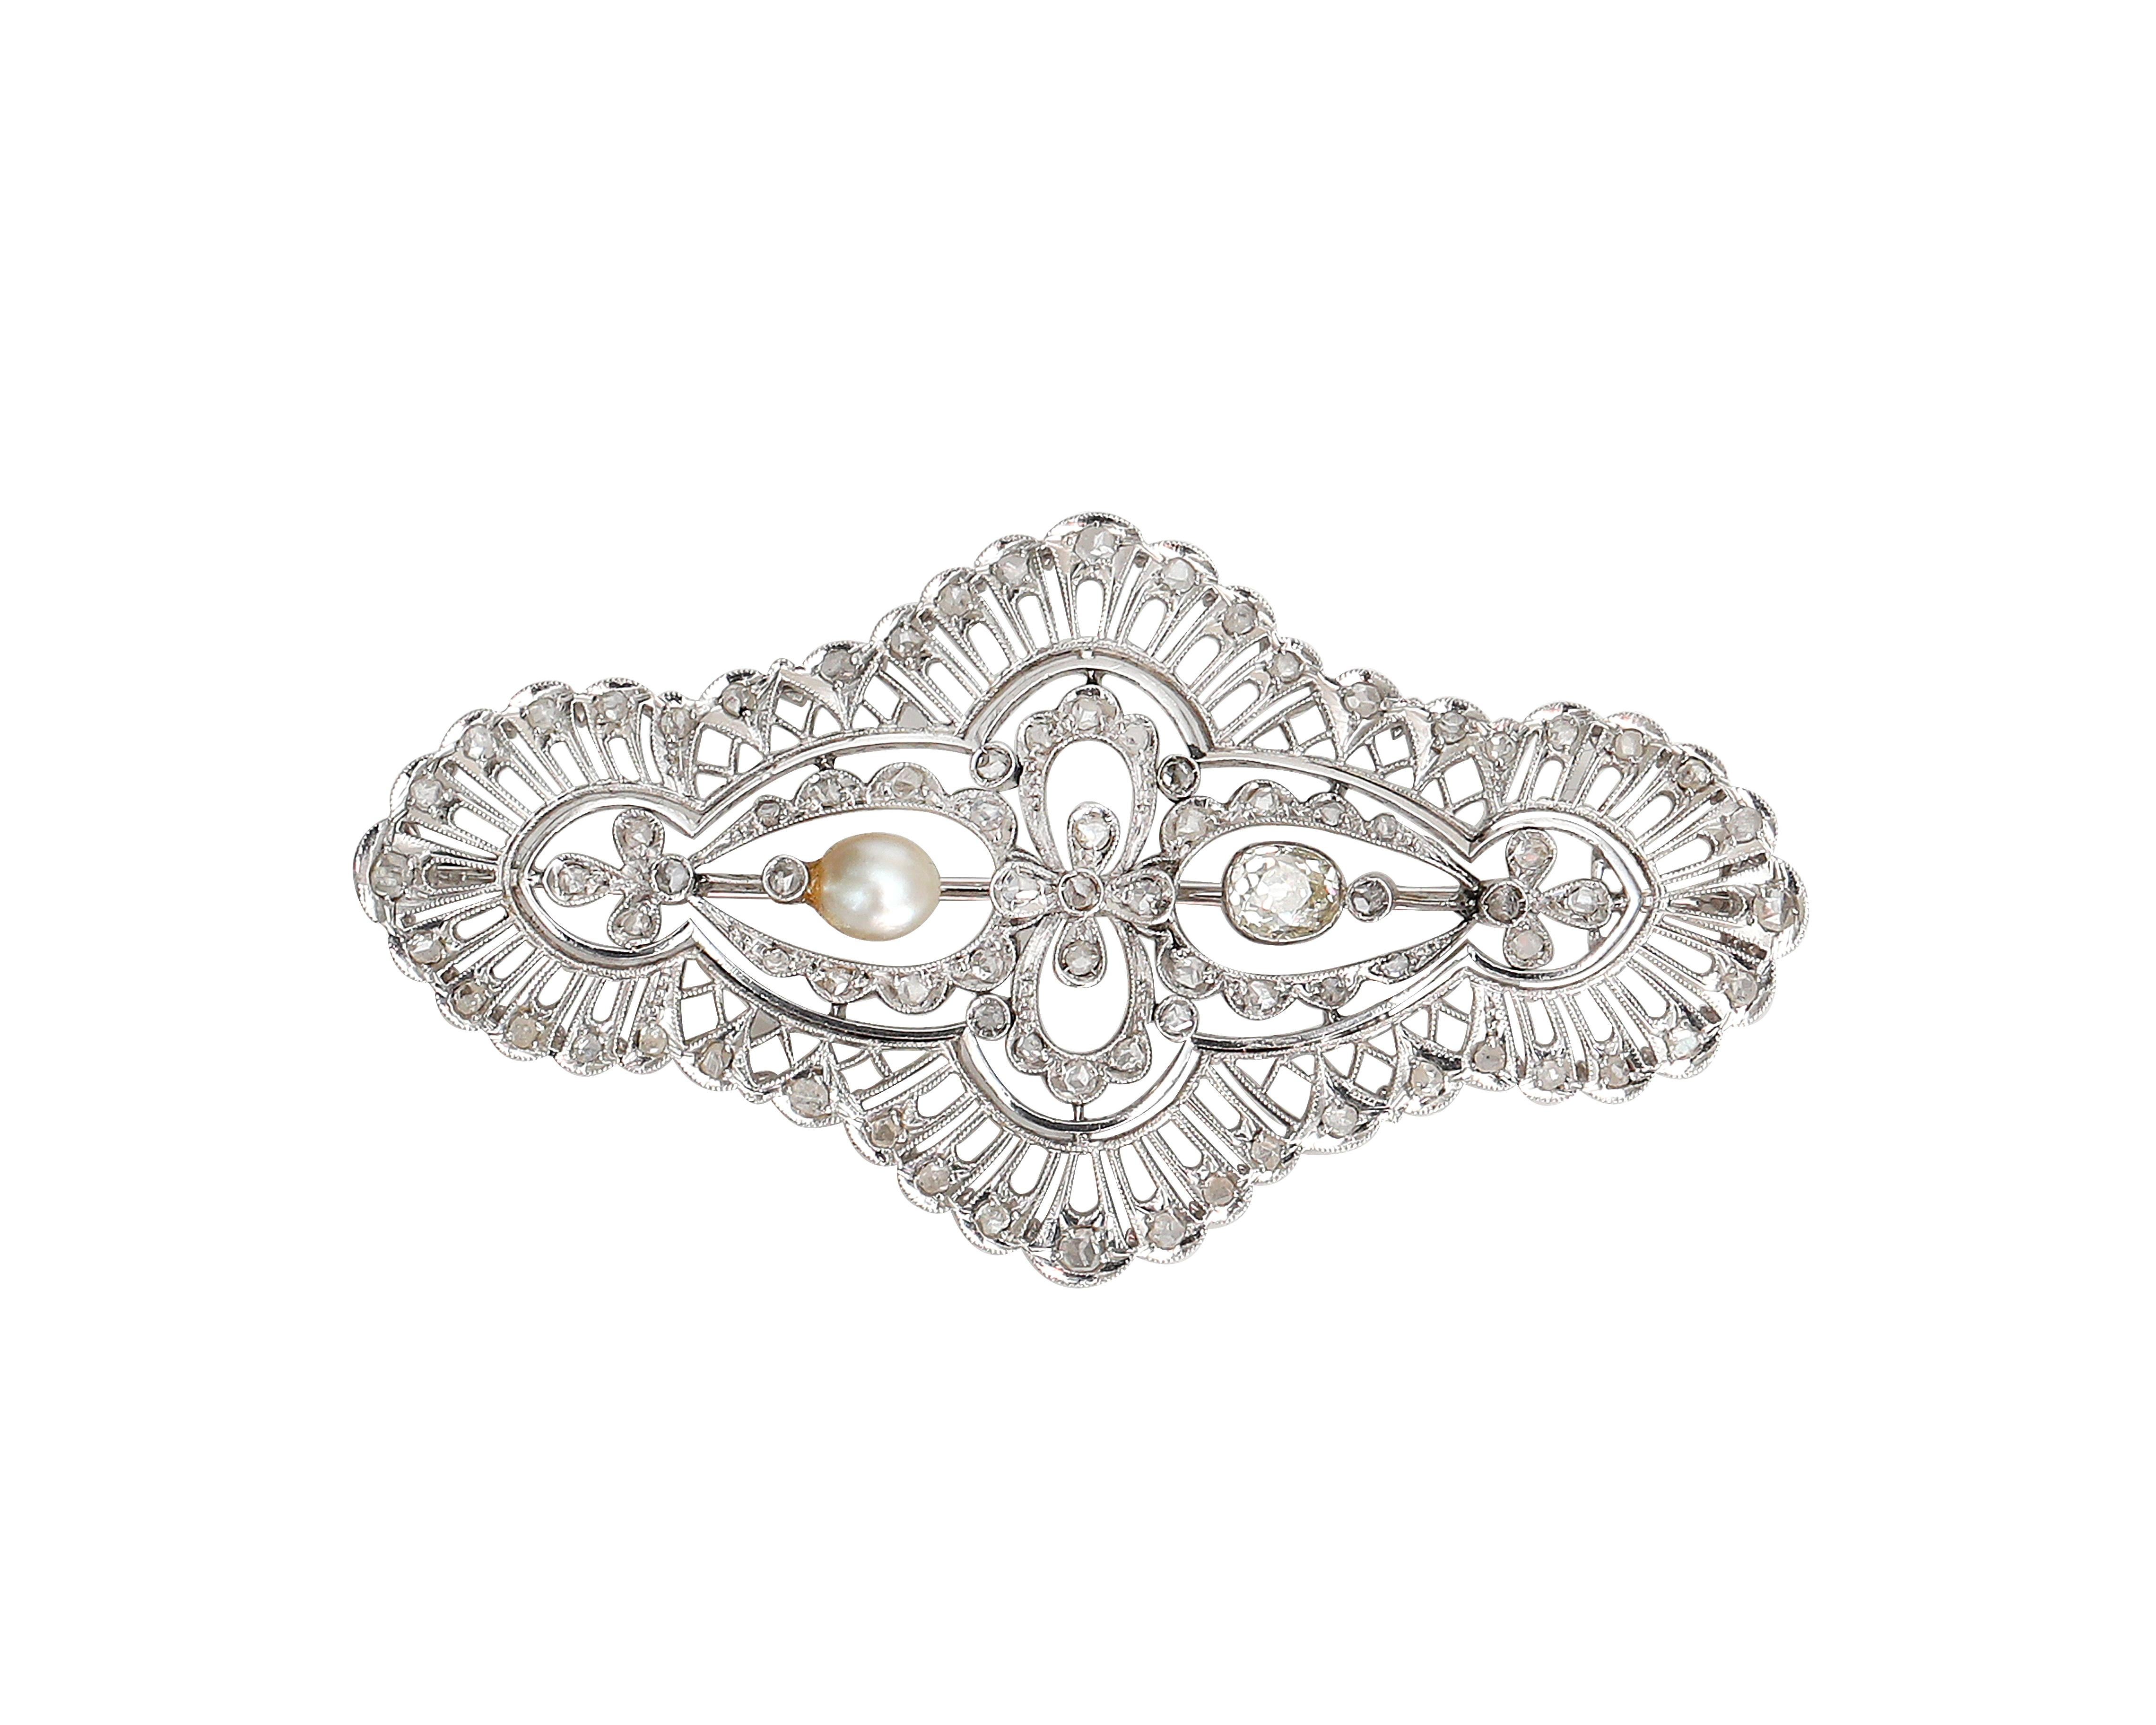 Late Victorian Victorian 18K Gold Filigree Brooch with Old Mine and Rose Cut Diamond and Pearl